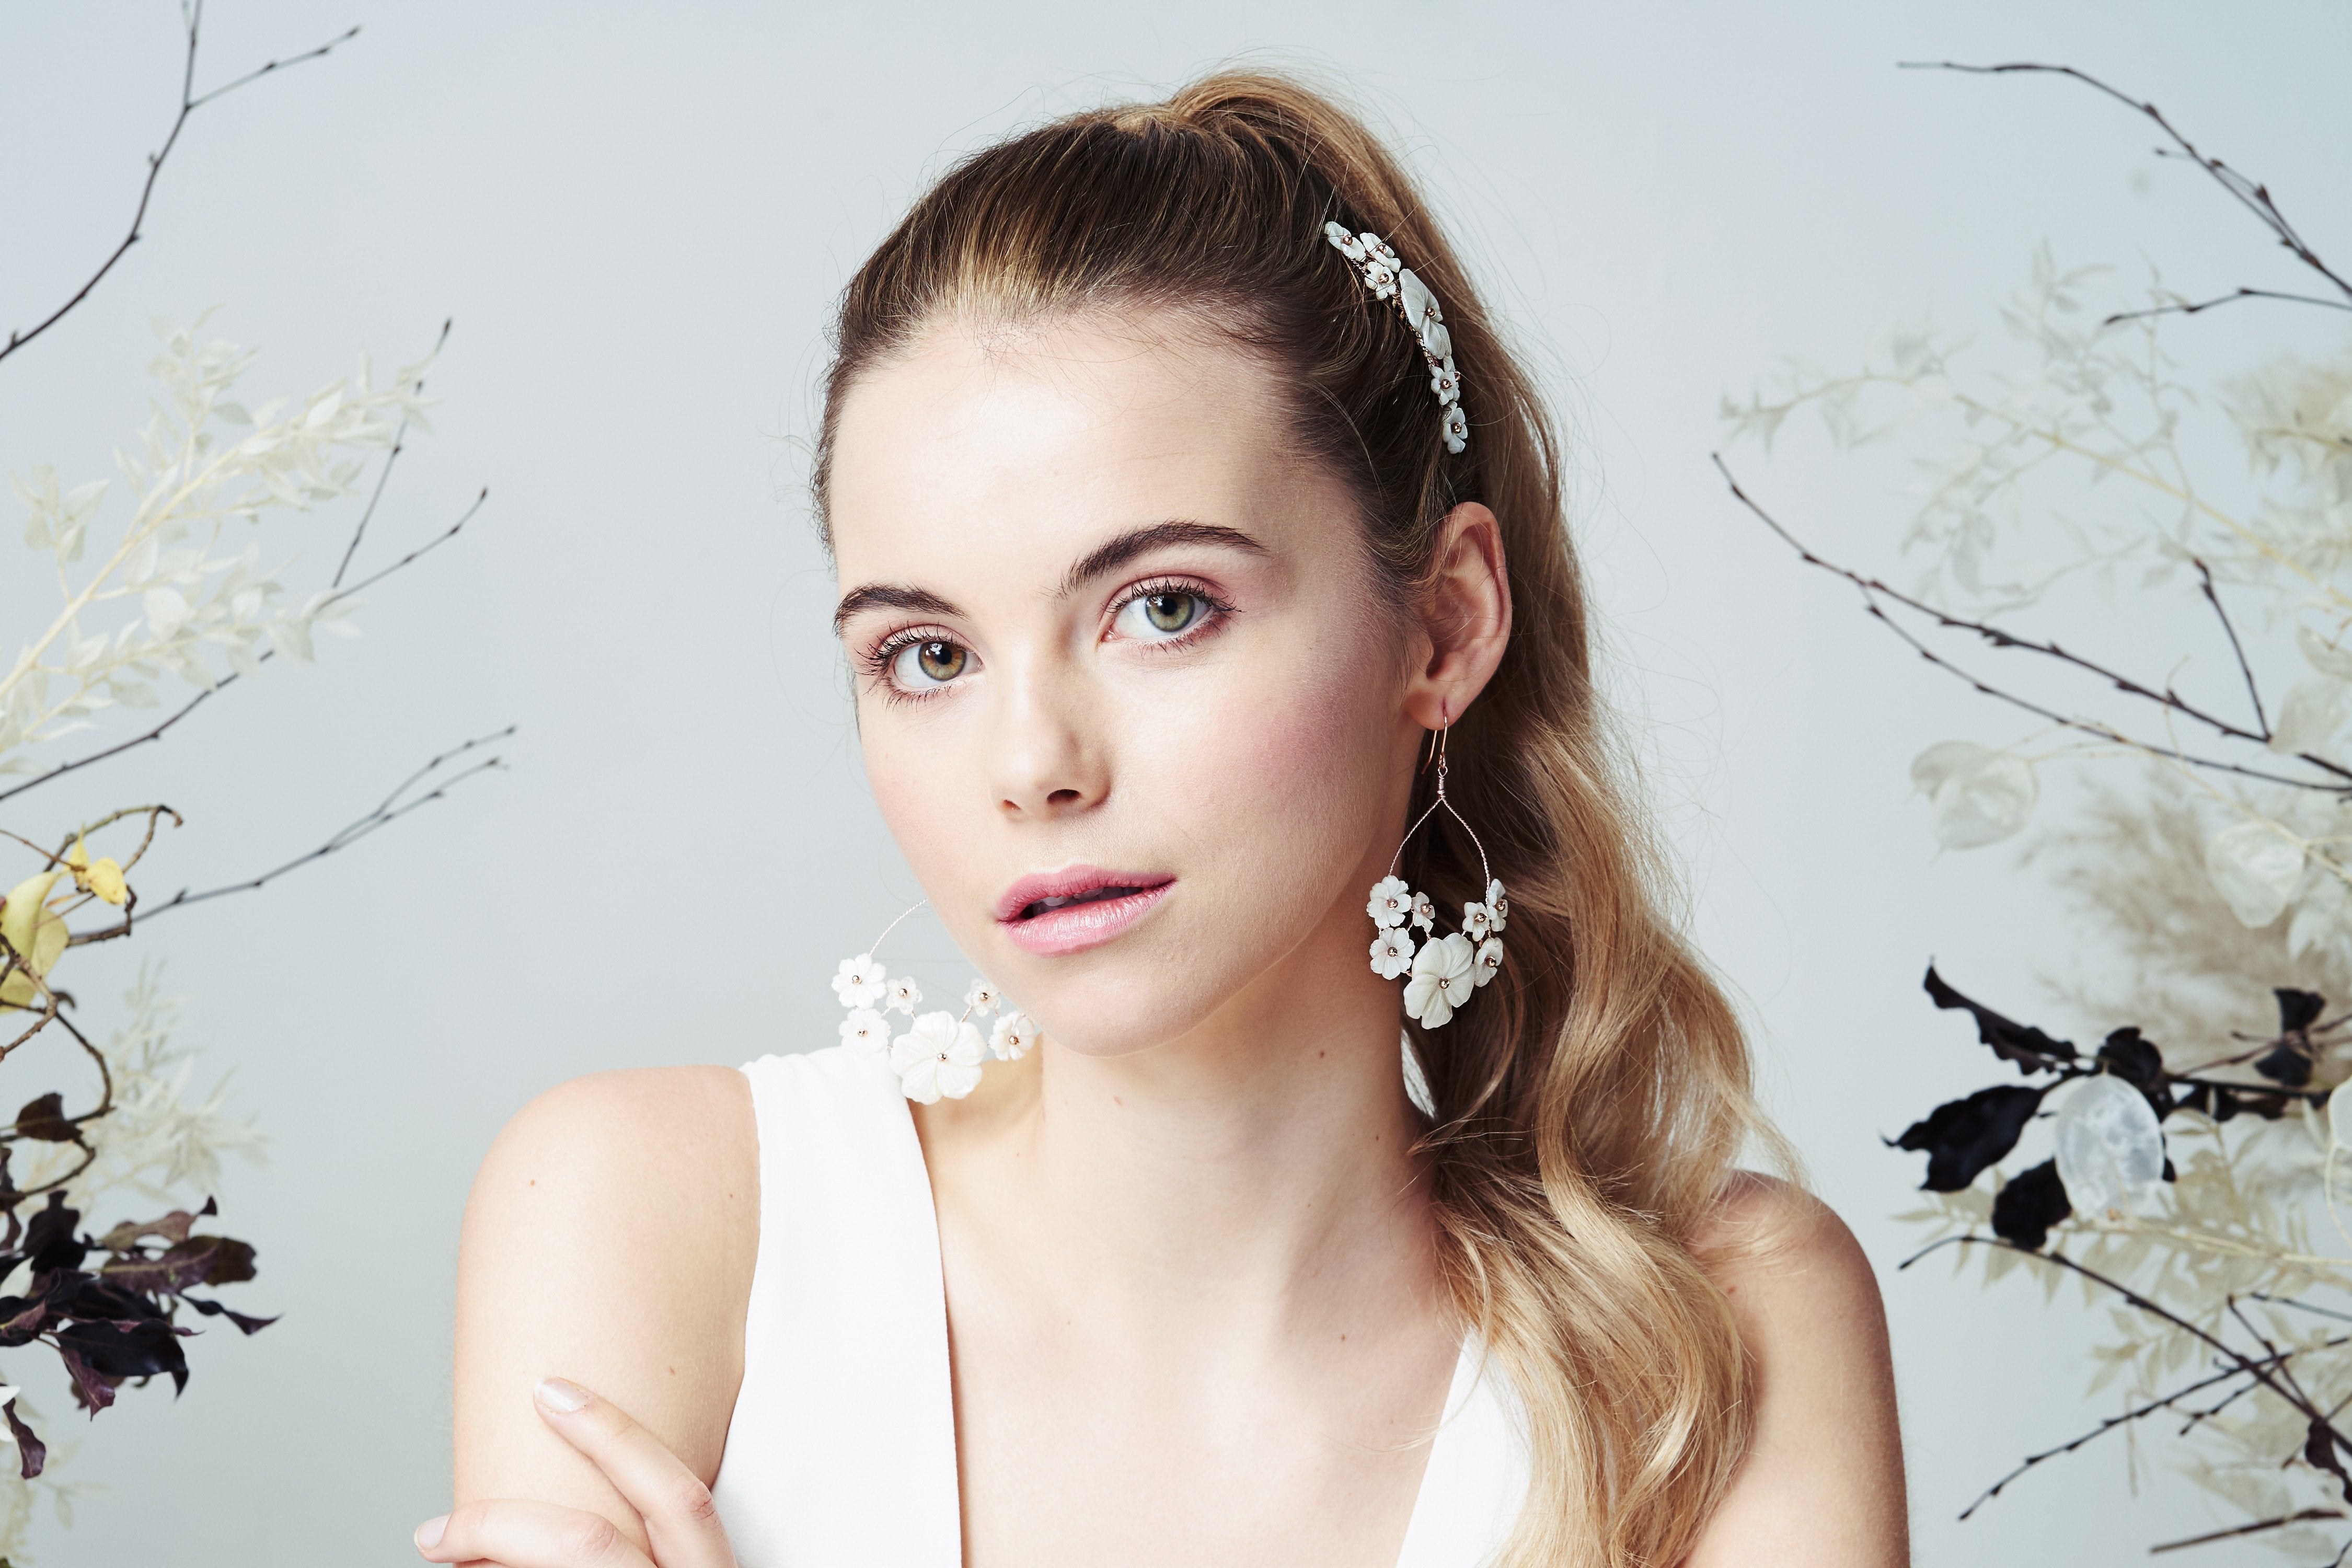 Flower hoop earrings and comb set for a boho bride worn with high pony tail